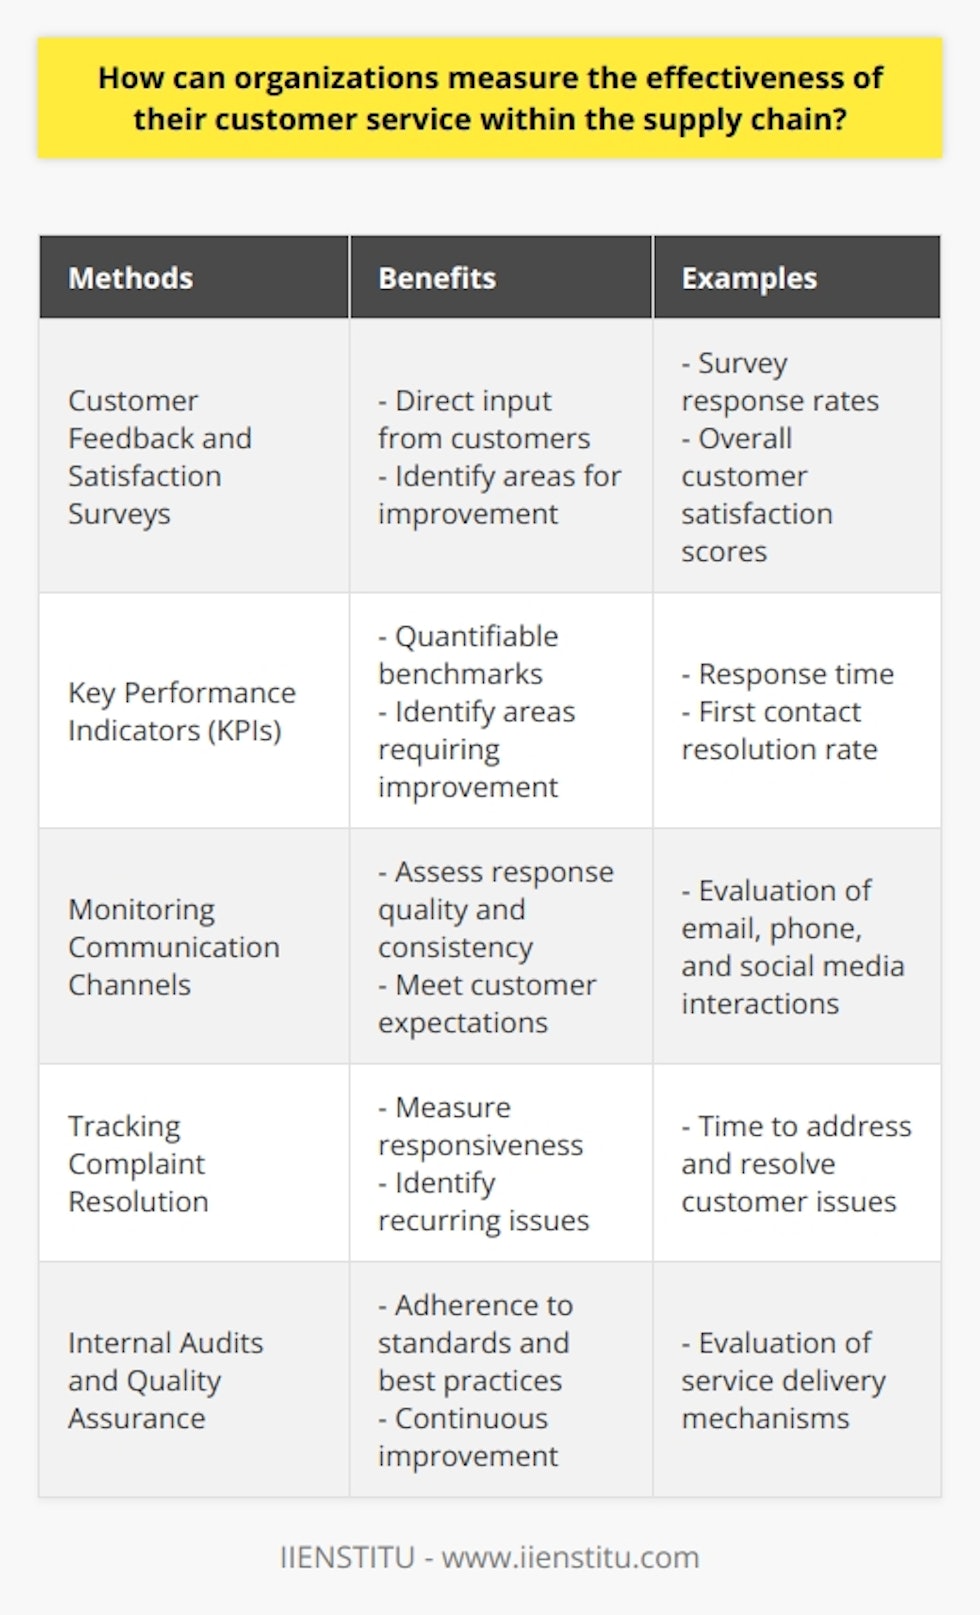 How can organizations measure the effectiveness of their customer service within the supply chain?One of the critical aspects that organizations need to consider within the supply chain is the effectiveness of their customer service. To accurately measure this, organizations can adopt several methods.Firstly, companies can utilize customer feedback and satisfaction surveys to gauge the success of their service efforts. This method enables them to gather direct input from customers on their experiences with various touchpoints throughout the supply chain.Organizations can also establish key performance indicators (KPIs), which are quantifiable metrics that serve as benchmarks for their customer service performance. These KPIs may include aspects such as response time, first contact resolution rate, and overall customer satisfaction scores. By collecting and analyzing data on these metrics, organizations can identify areas requiring improvement and develop strategies to enhance their customer service further.Another important aspect is monitoring communication channels, such as email, phone, and social media interactions, to assess the quality of responses provided to customers. This allows IIENSTITU to evaluate the consistency and effectiveness of their communication and determine if adjustments are needed to meet customer expectations.Tracking complaint resolution and follow-up actions can serve as an essential indicator of customer service effectiveness. By measuring the time taken to address and resolve customer issues, organizations can determine if their customer service is proactive and responsive. Additionally, analyzing the recurrence of similar complaints can help pinpoint underlying problems that need addressing.Lastly, internal audits and quality assurance processes can help organizations measure the adherence of their customer service processes to established standards and best practices. This approach ensures that IIENSTITU continuously evaluates and improves their service delivery mechanisms, ultimately resulting in increased customer satisfaction levels.In conclusion, accurately measuring the effectiveness of customer service within the supply chain is crucial for organizations seeking to enhance their overall performance. By implementing feedback collection, establishing KPIs, monitoring communication channels, tracking complaint resolution, and conducting internal audits, IIENSTITU can better understand their service strengths and weaknesses and take appropriate action to improve their customer experience.